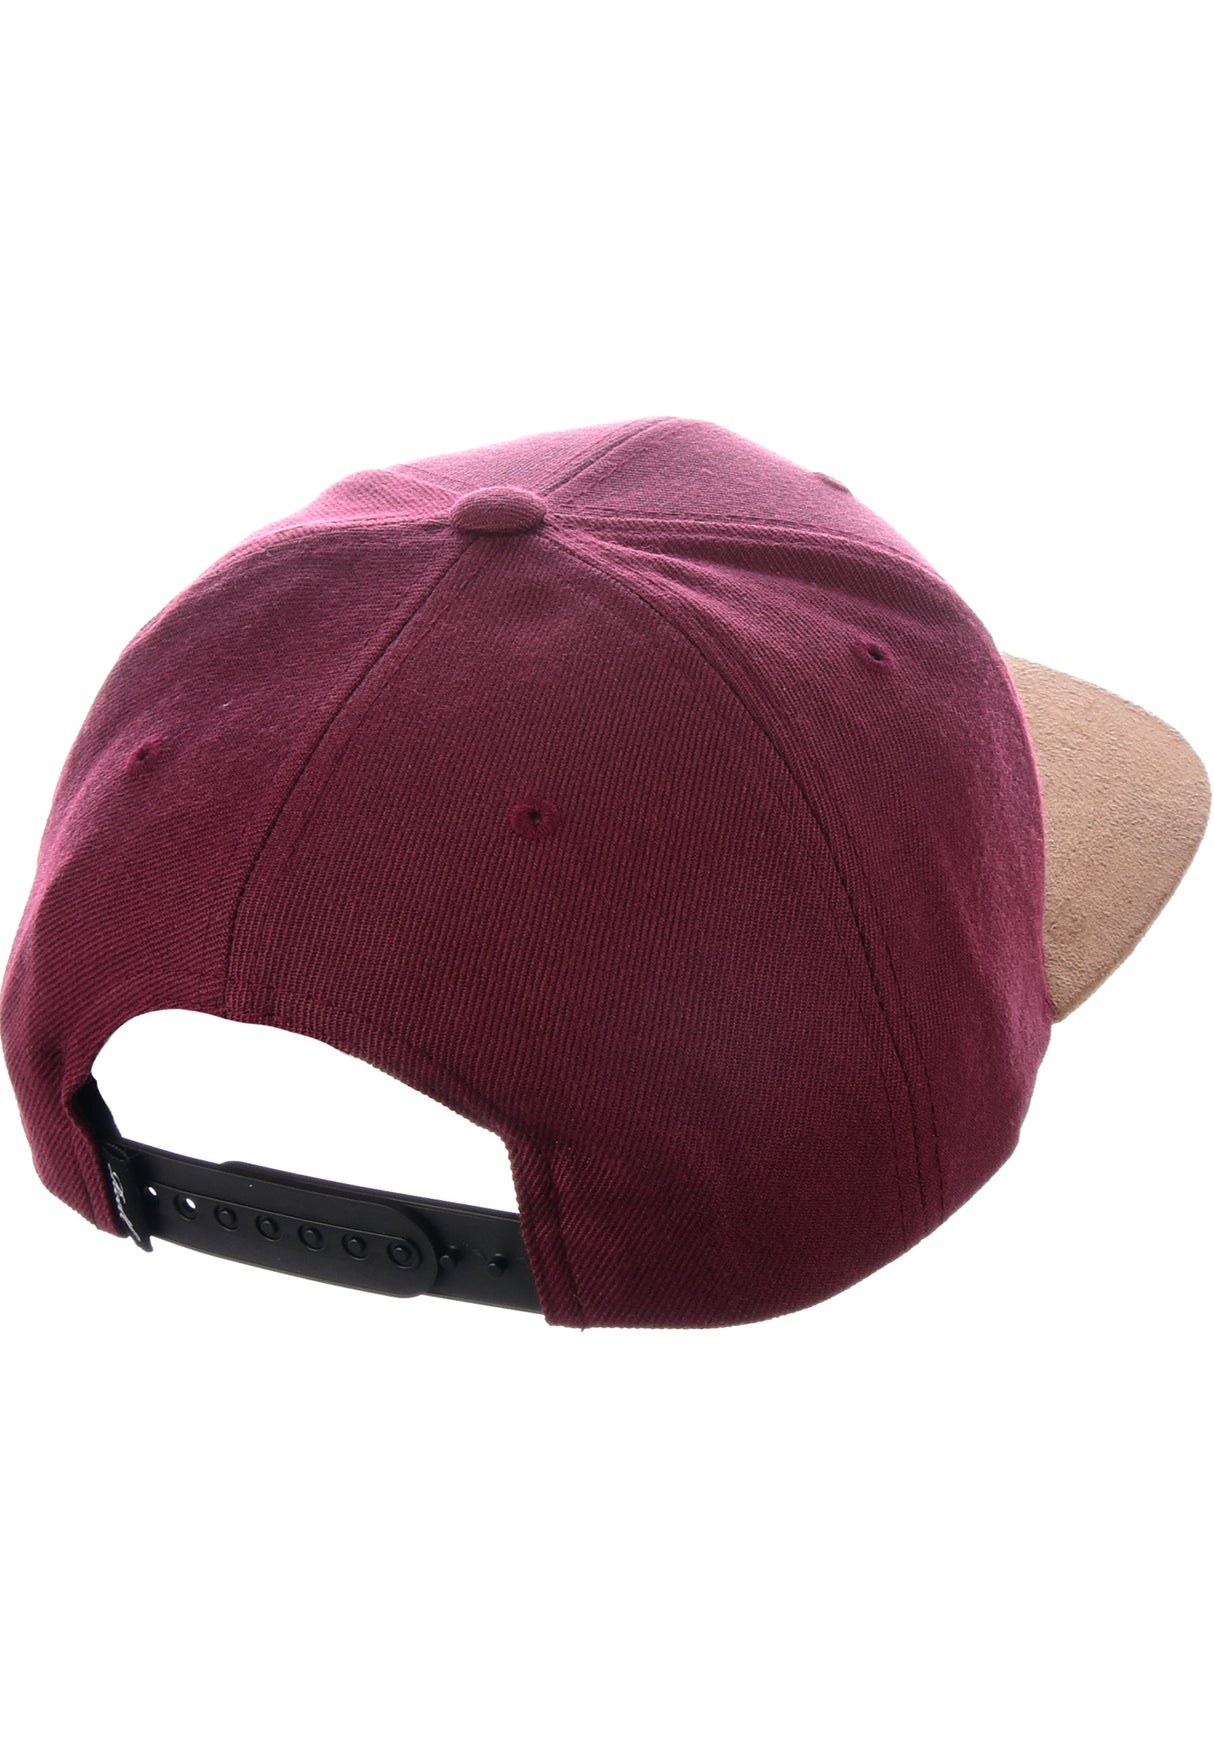 Suede 6-Panel maroon Close-Up1